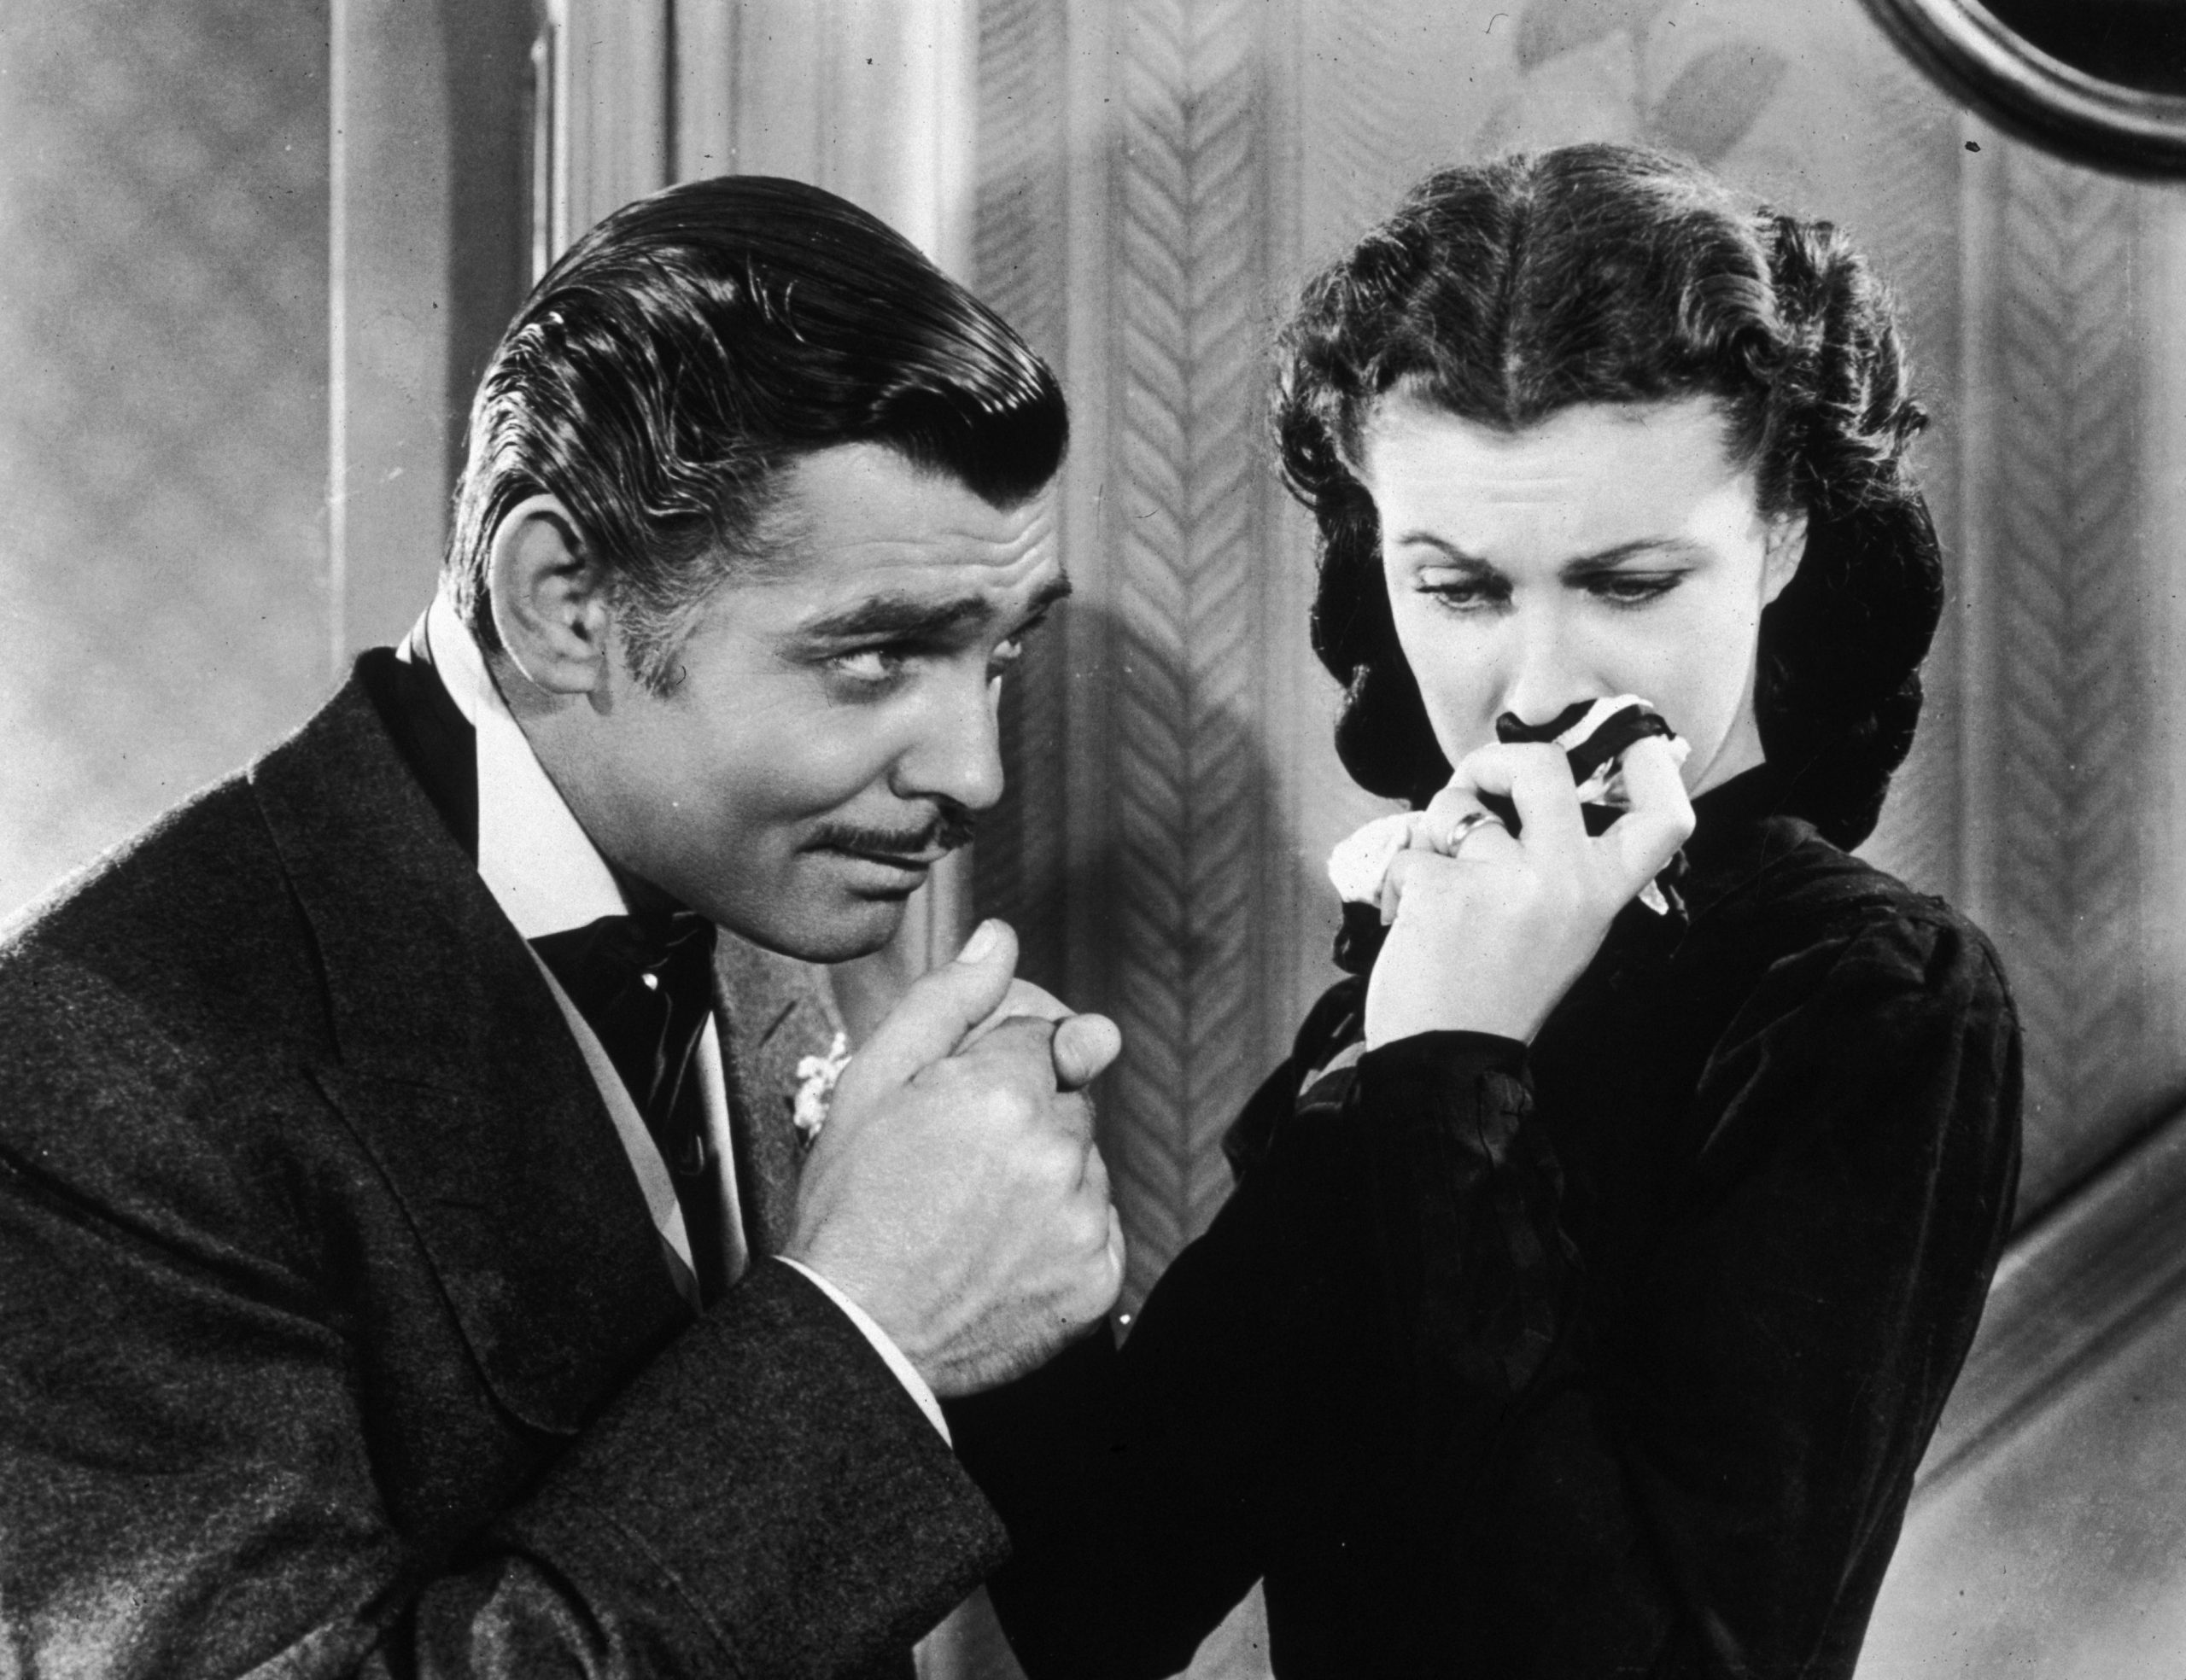 American actor Clark Gable (1901 - 1960) in his role as Rhett Butler kissing the hand of a tearful Scarlett O'Hara, played by Vivien Leigh in 'Gone With The Wind'. (Hulton Archive/Getty Images)